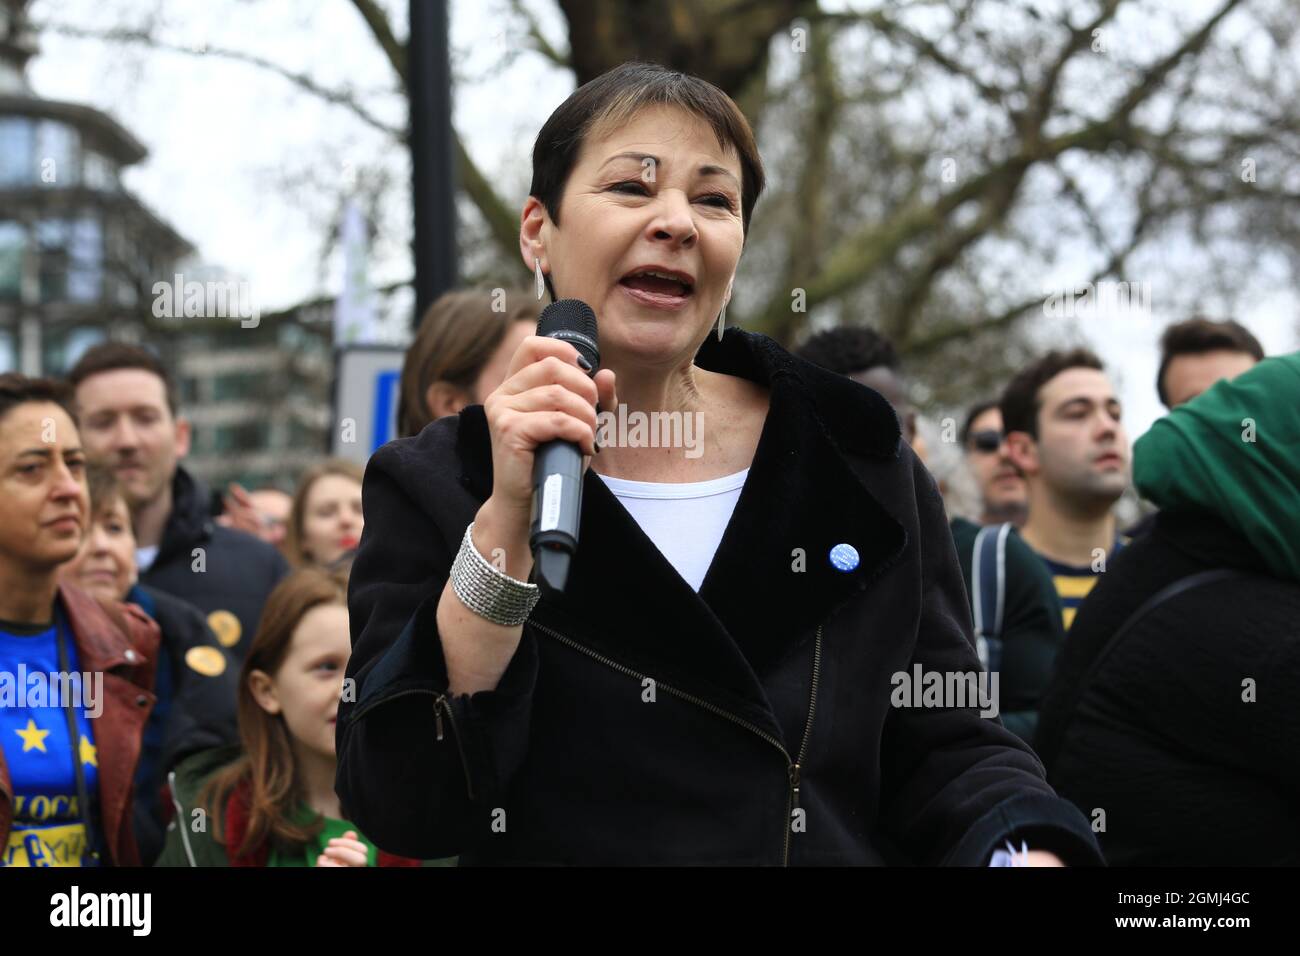 Caroline Lucas, Green MP in parliament, speaking to a crowd of Remain supporters during a march to Westminster. Stock Photo